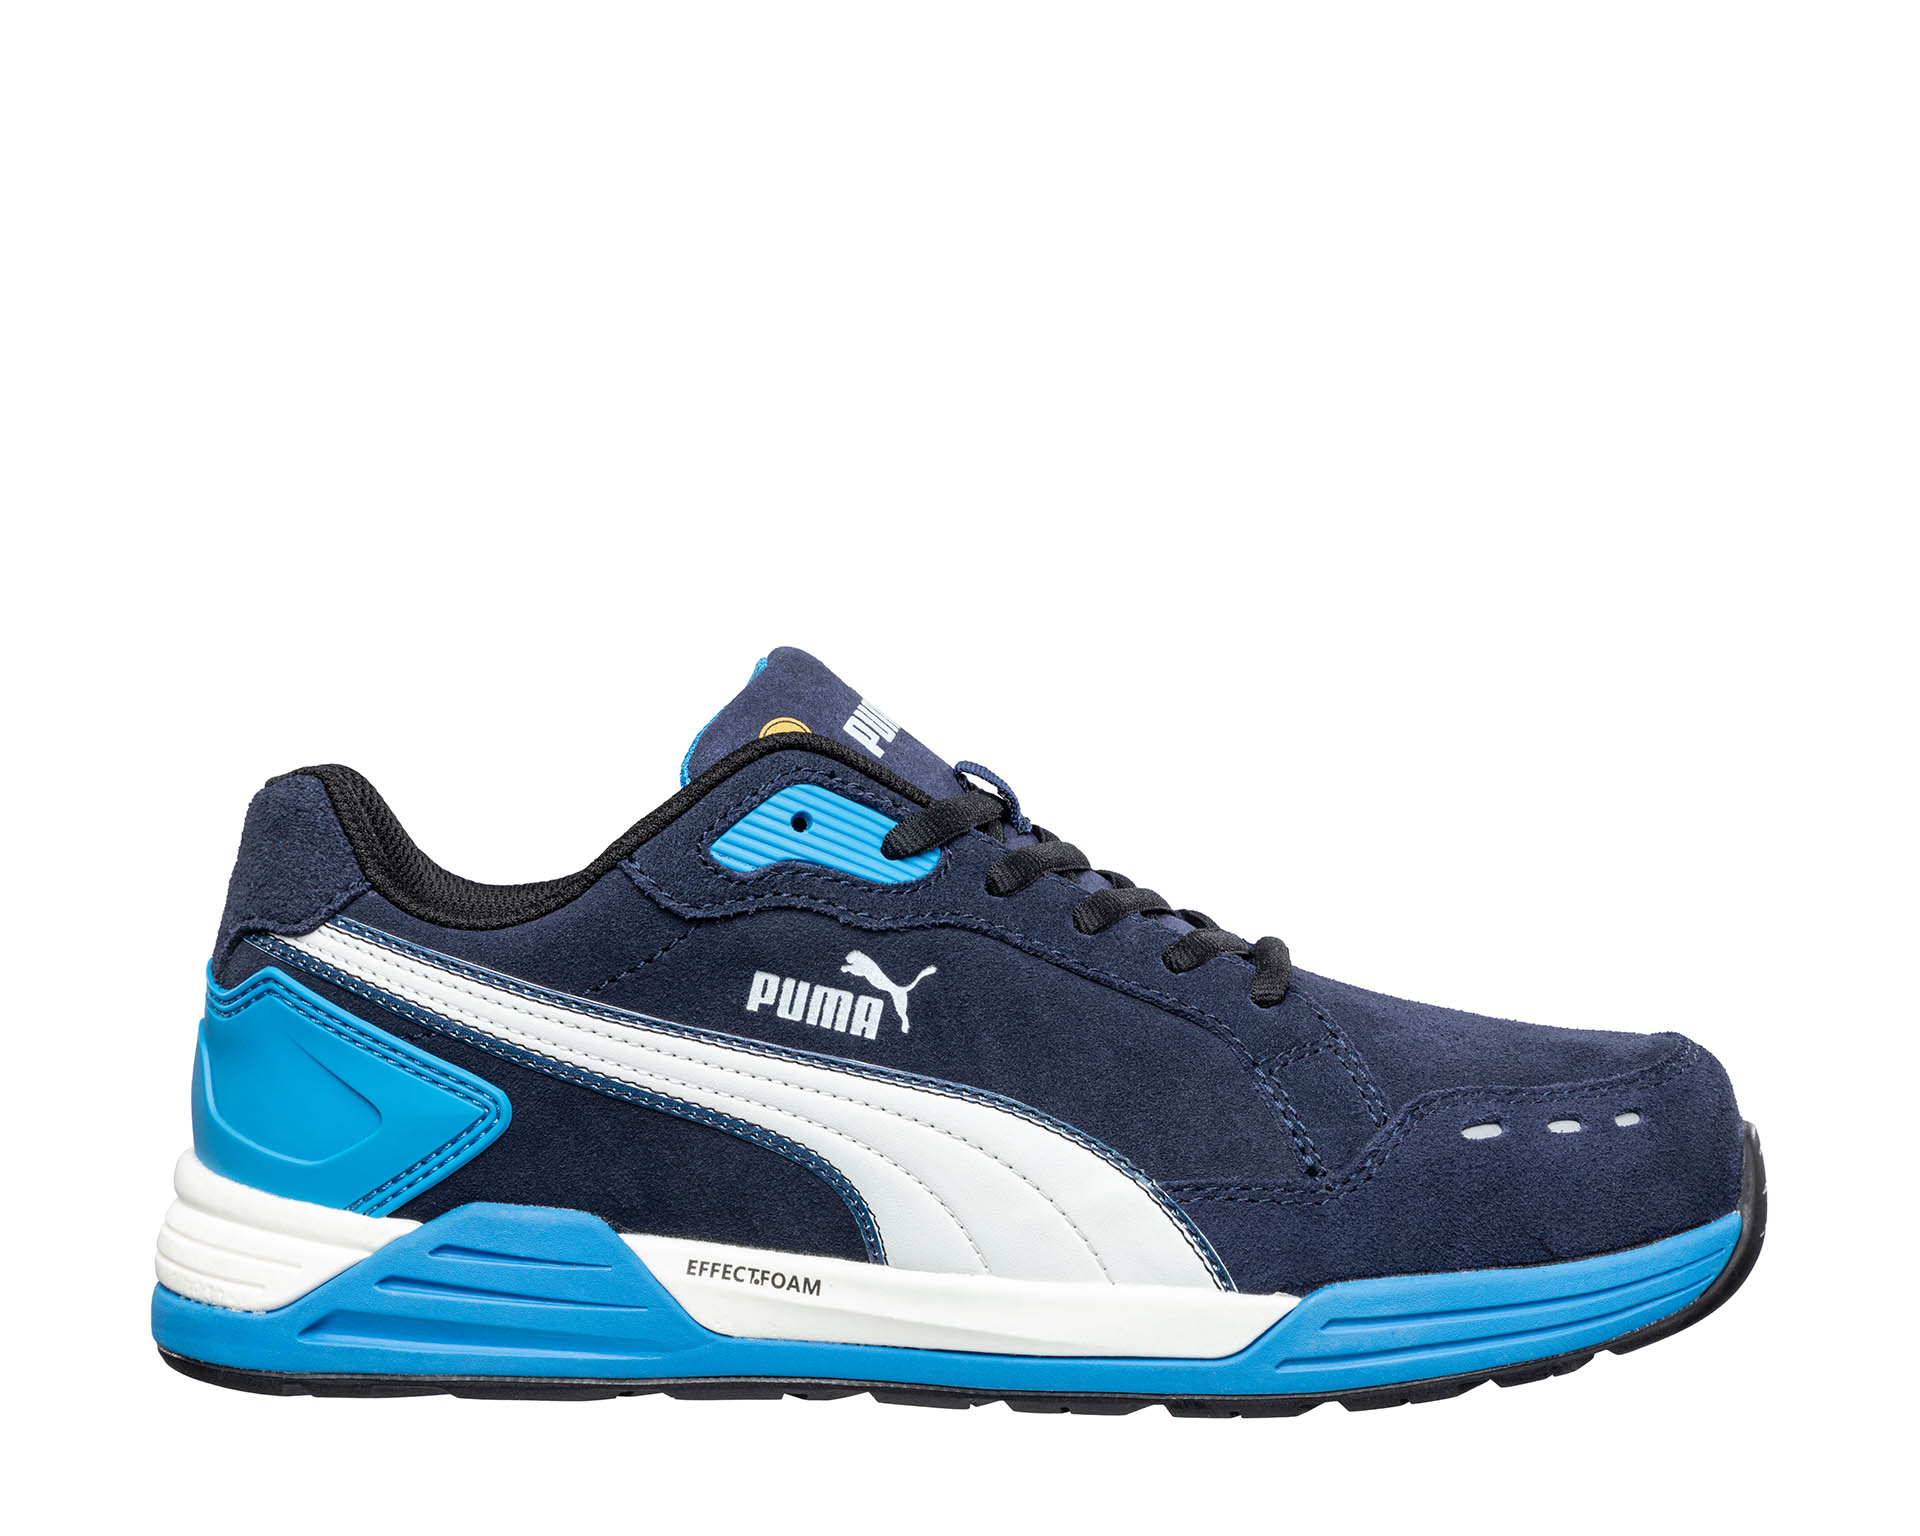 PUMA SAFETY safety shoes S3 ESD HRO SRC BLUE LOW | Puma Safety English